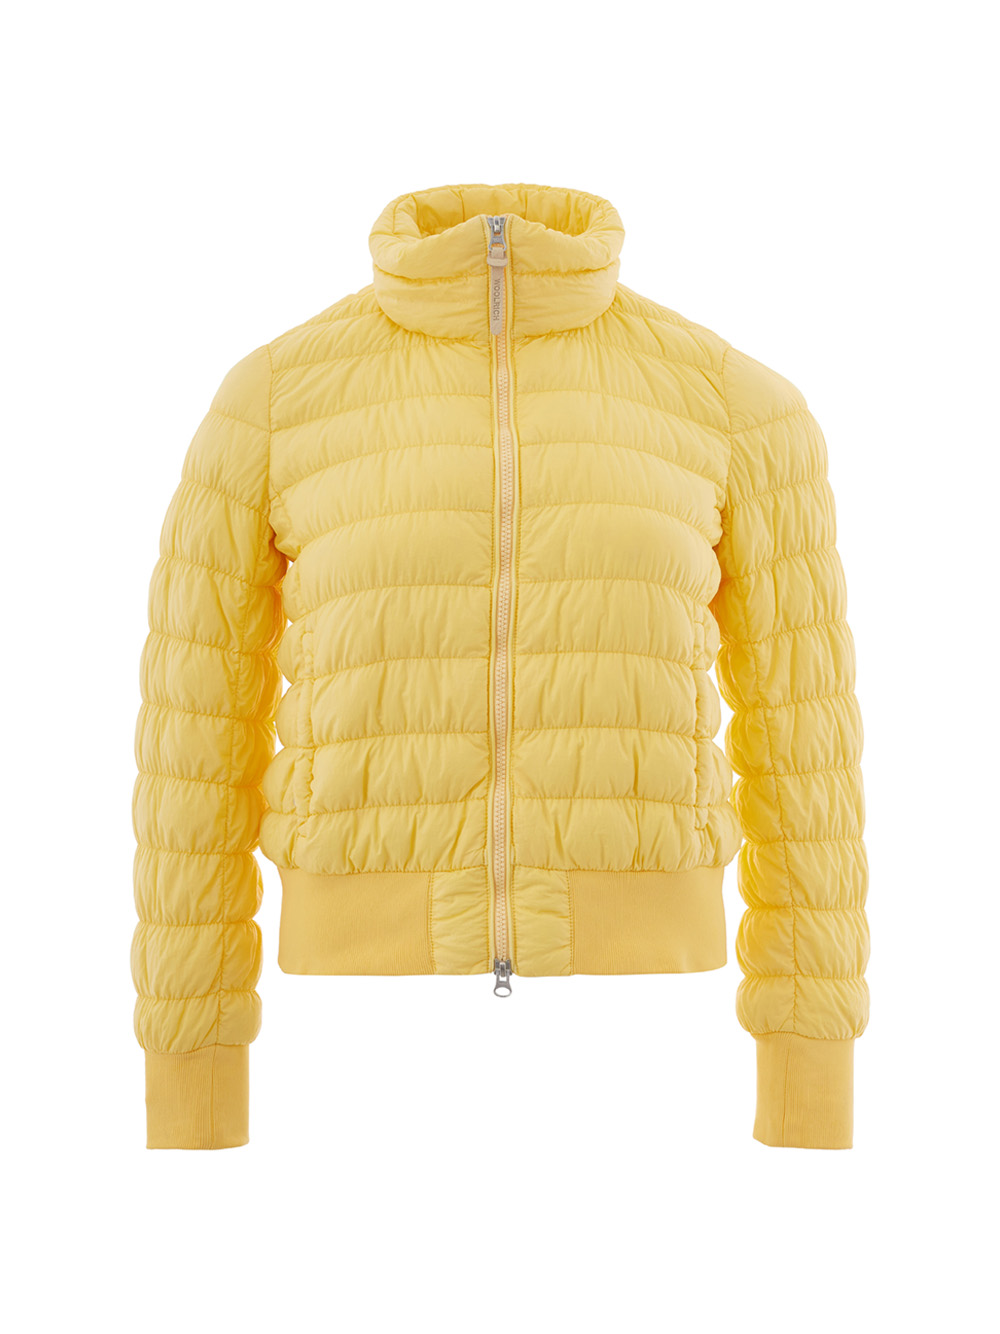 Woolrich Yellow Quilted Bomber Jacket • Fashion Brands Outlet